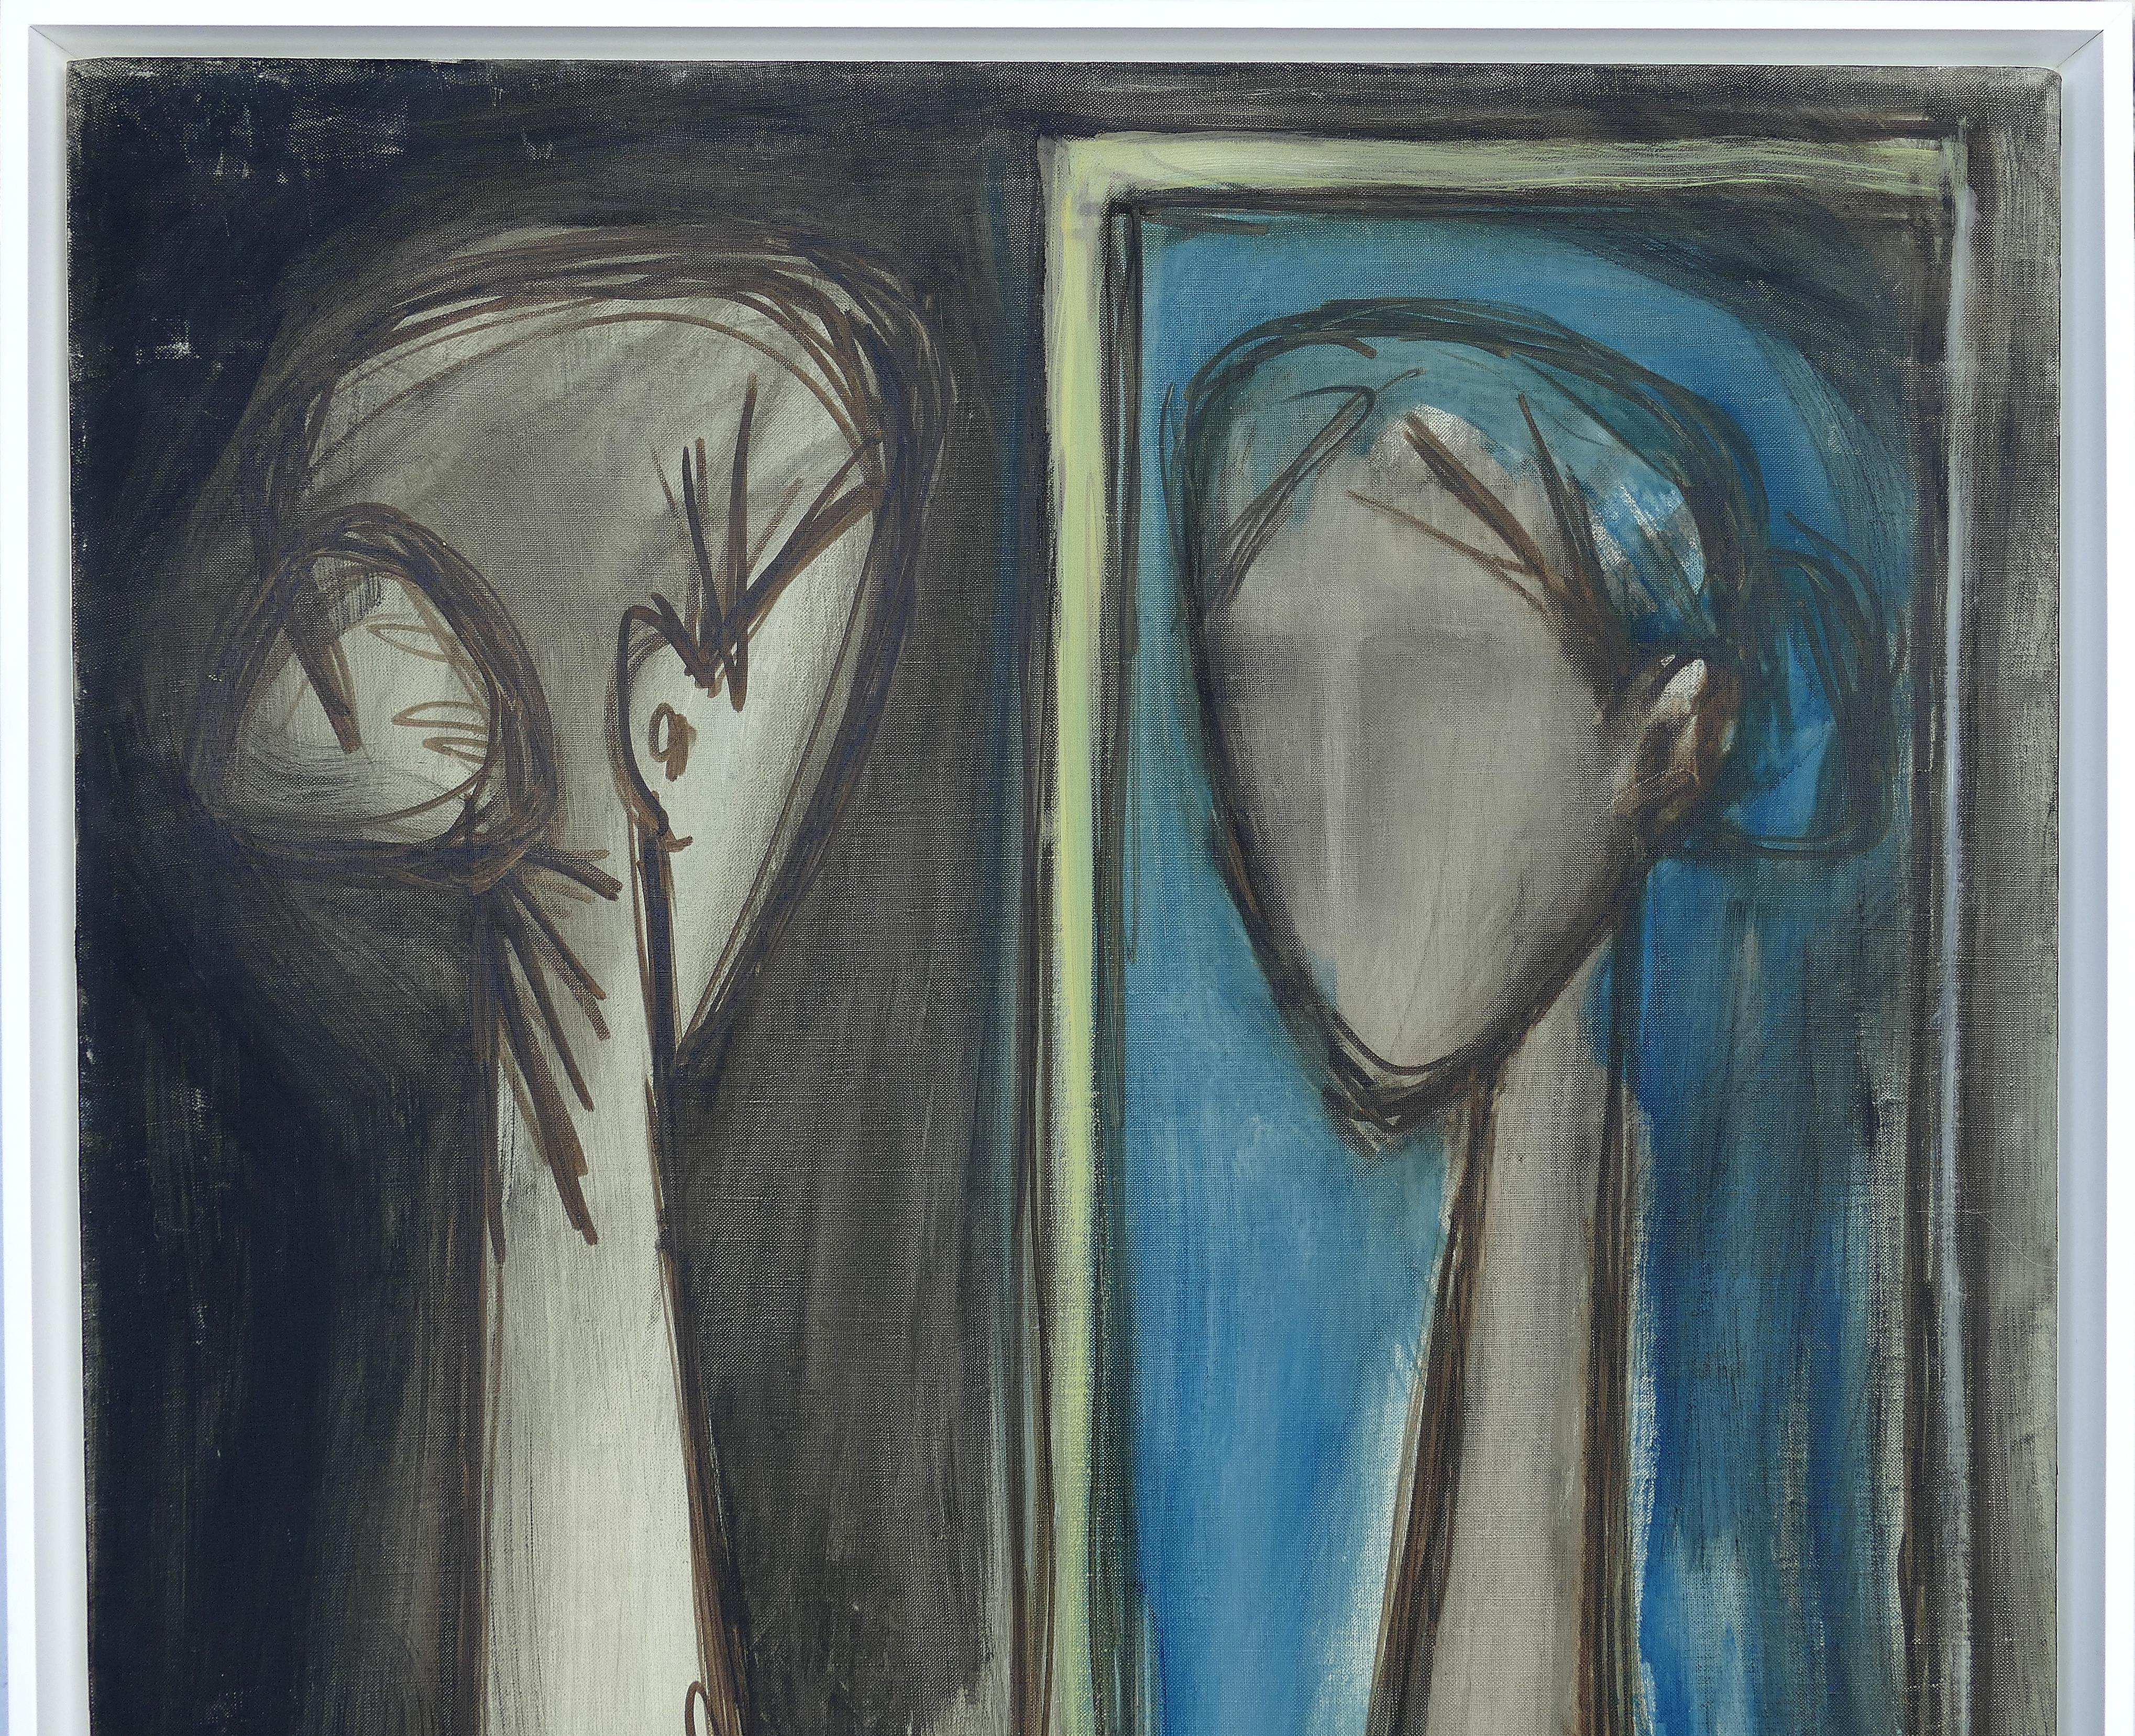 1950s Jacques Dunham modernist portrait painting of a woman looking in a mirror

Offered for sale is an impressive vintage 1950s Jacques Dunham modernist double portrait painting. The painting depicts a stylized woman with an elongated neck as she